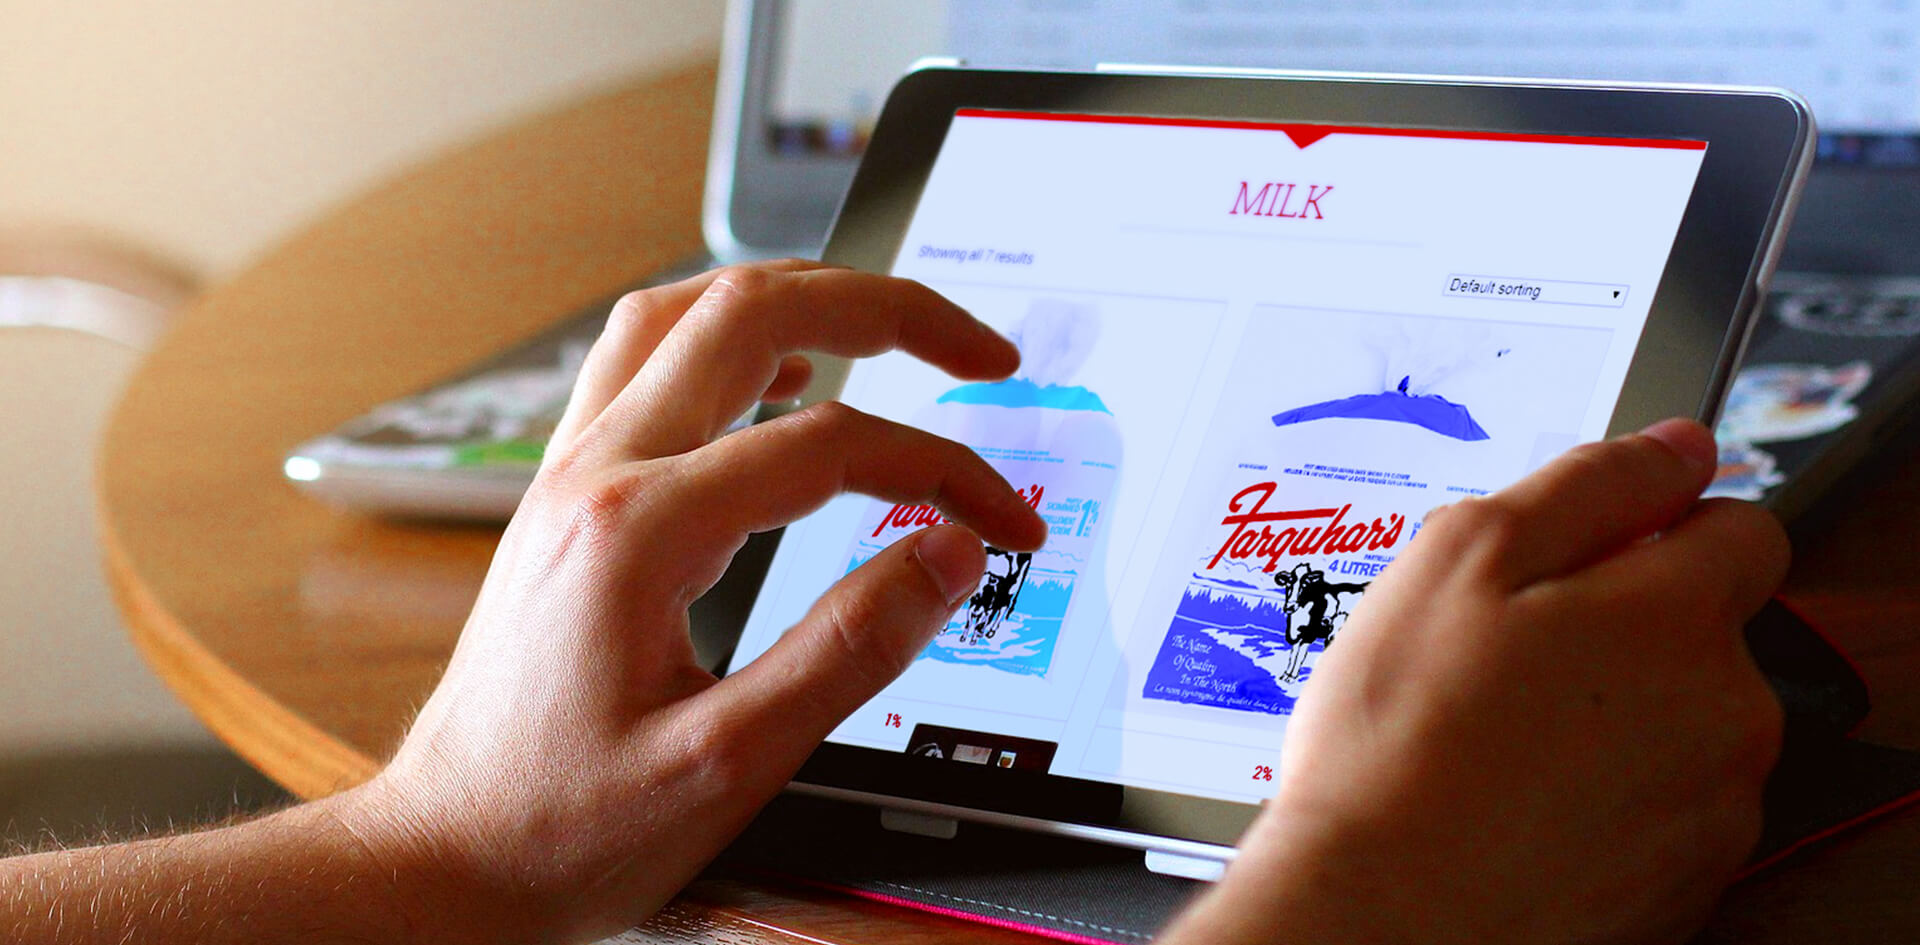 Farquhar’s Dairy website open on tablet